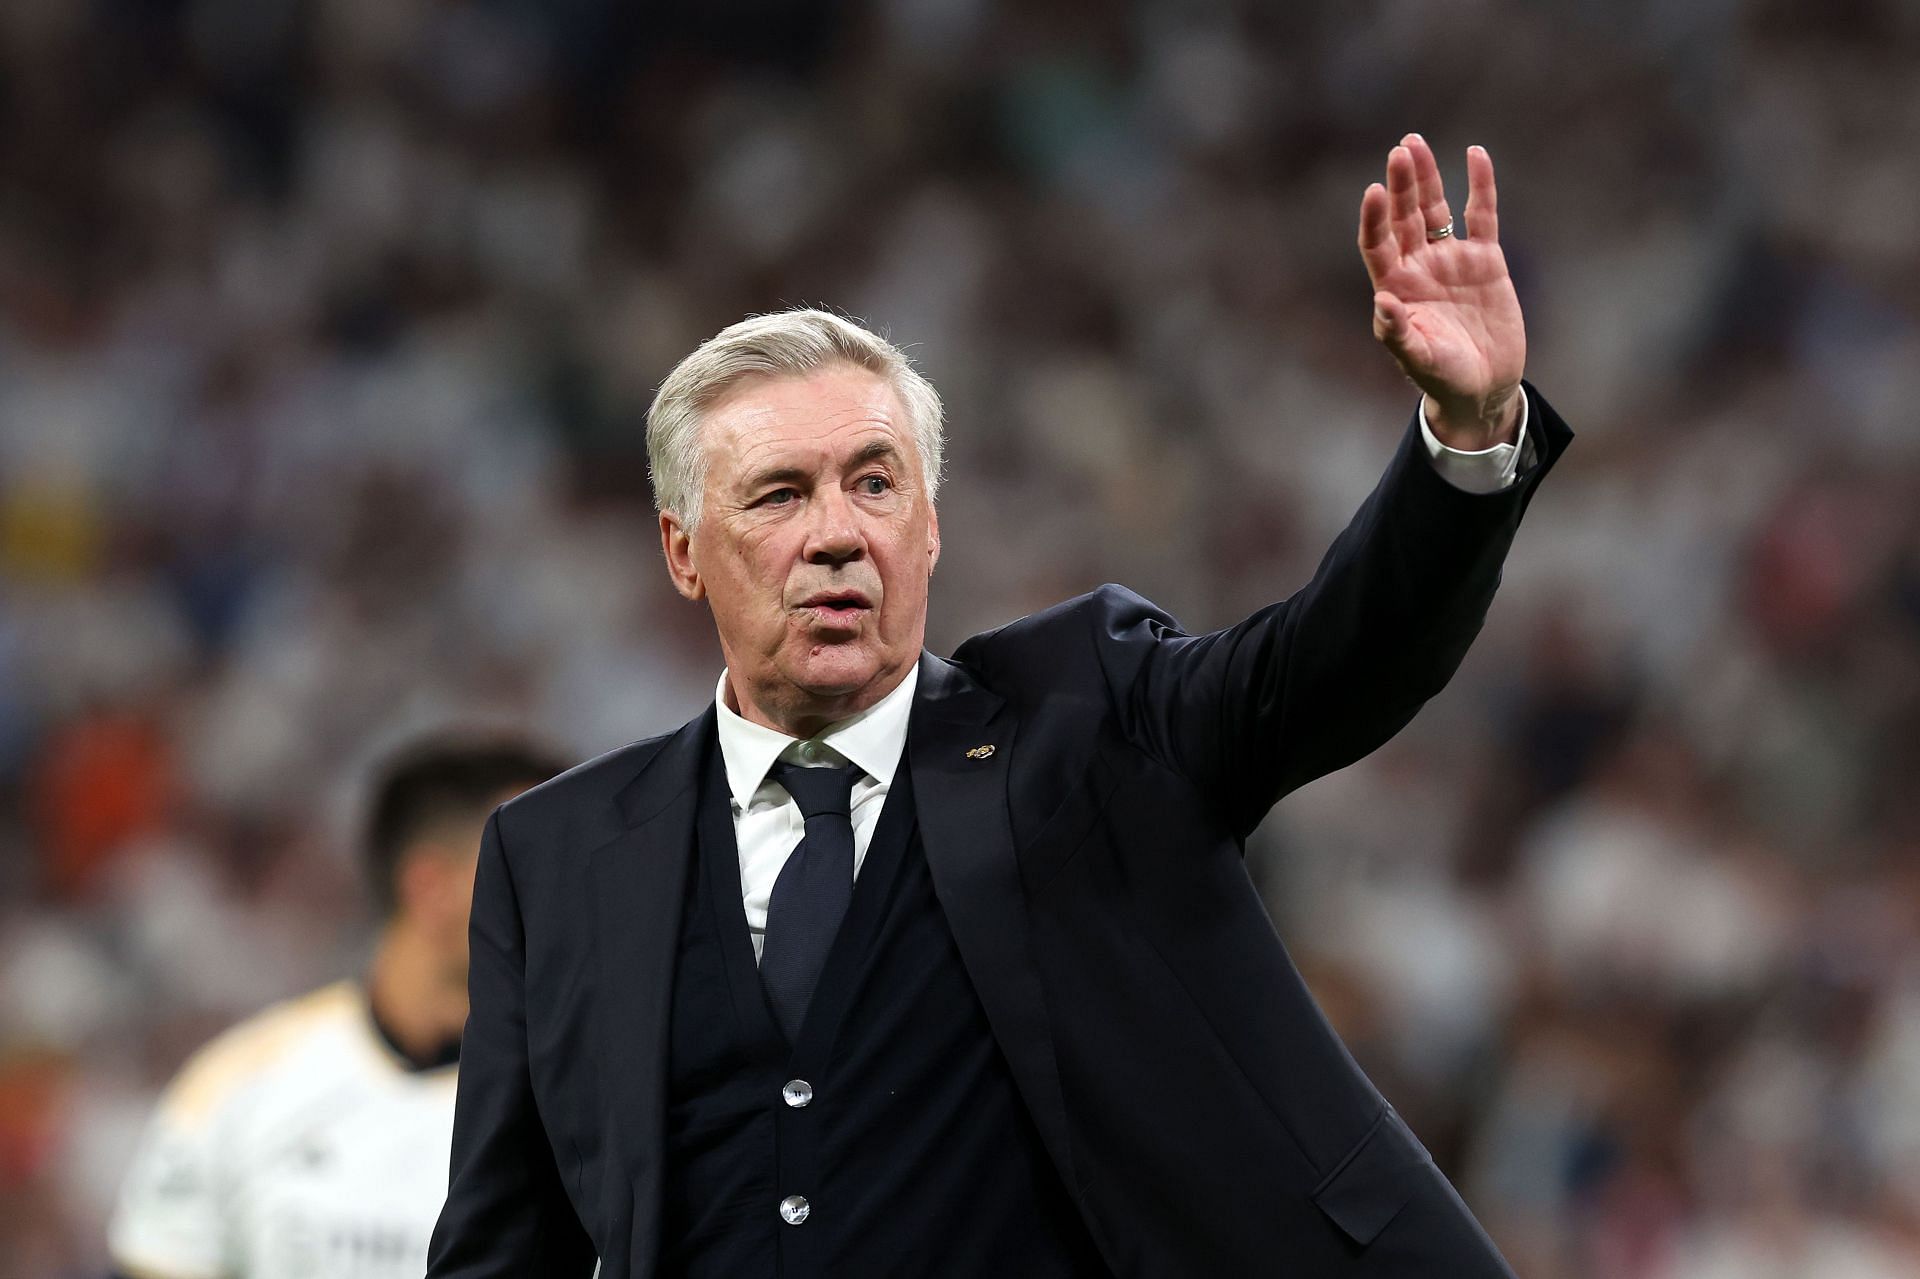 Carlo Ancelotti looks to have made a tough call.